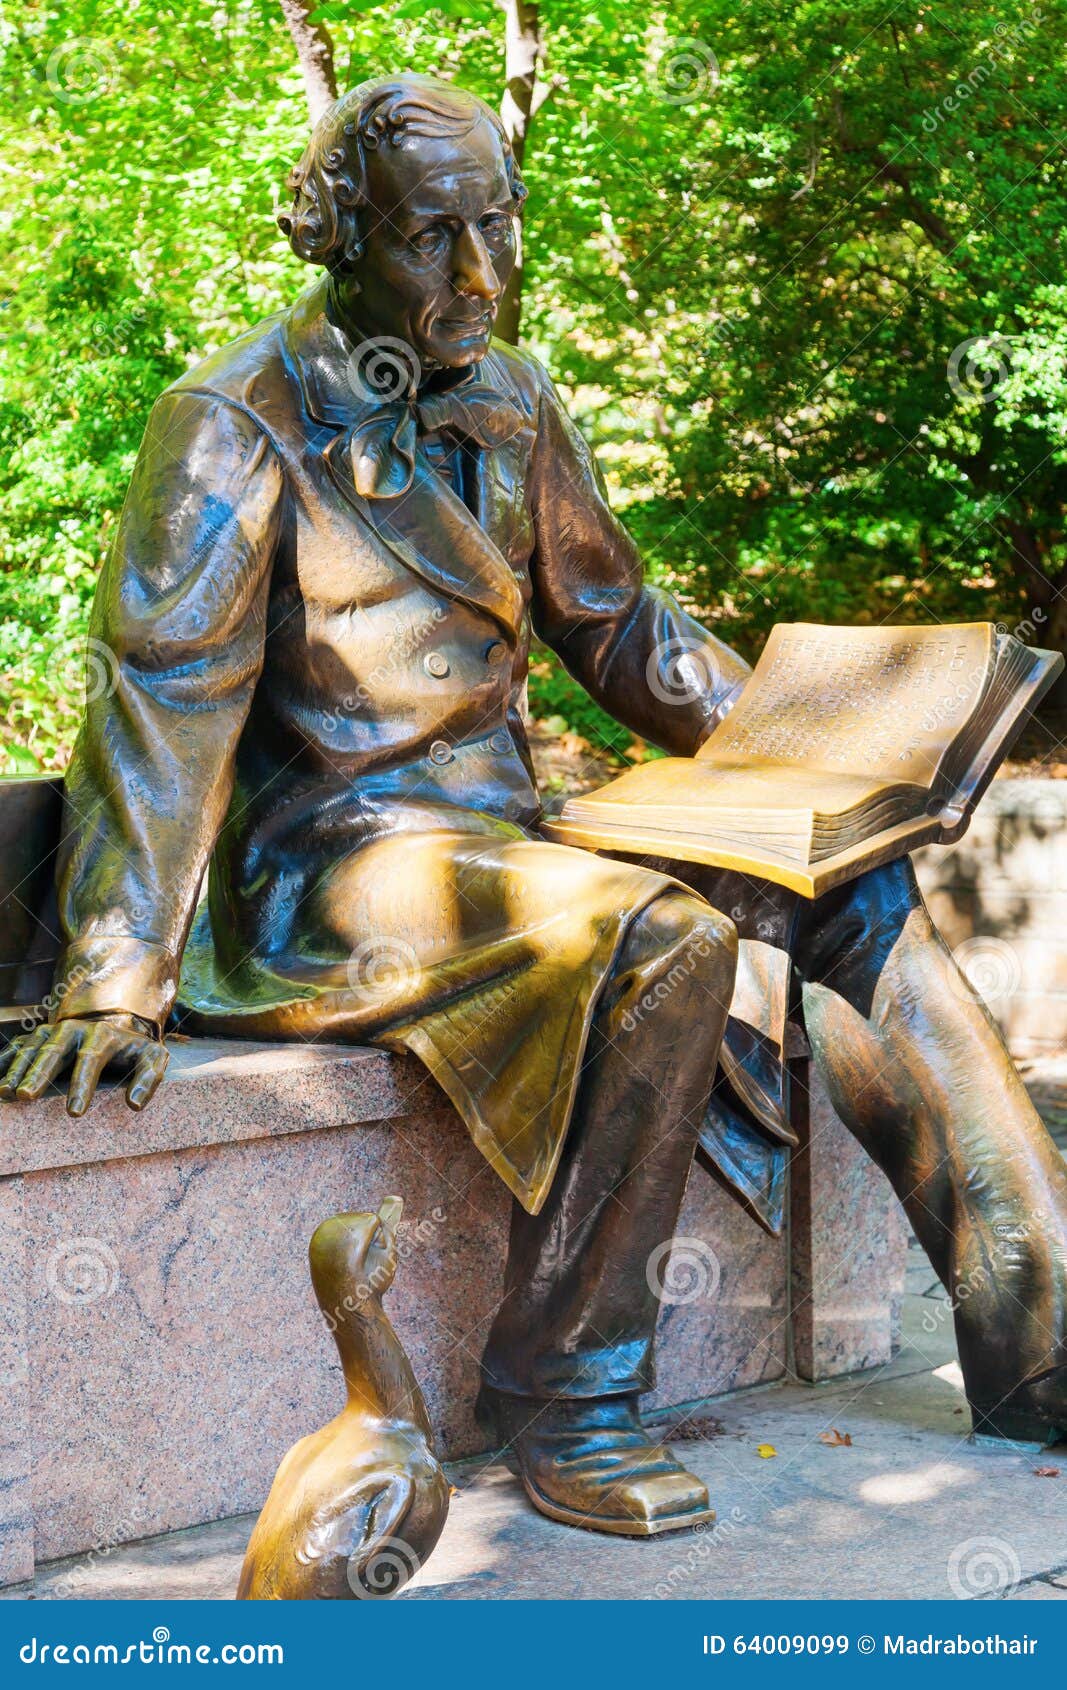 The Hans Christian Andersen Statue, Central Park, NYC